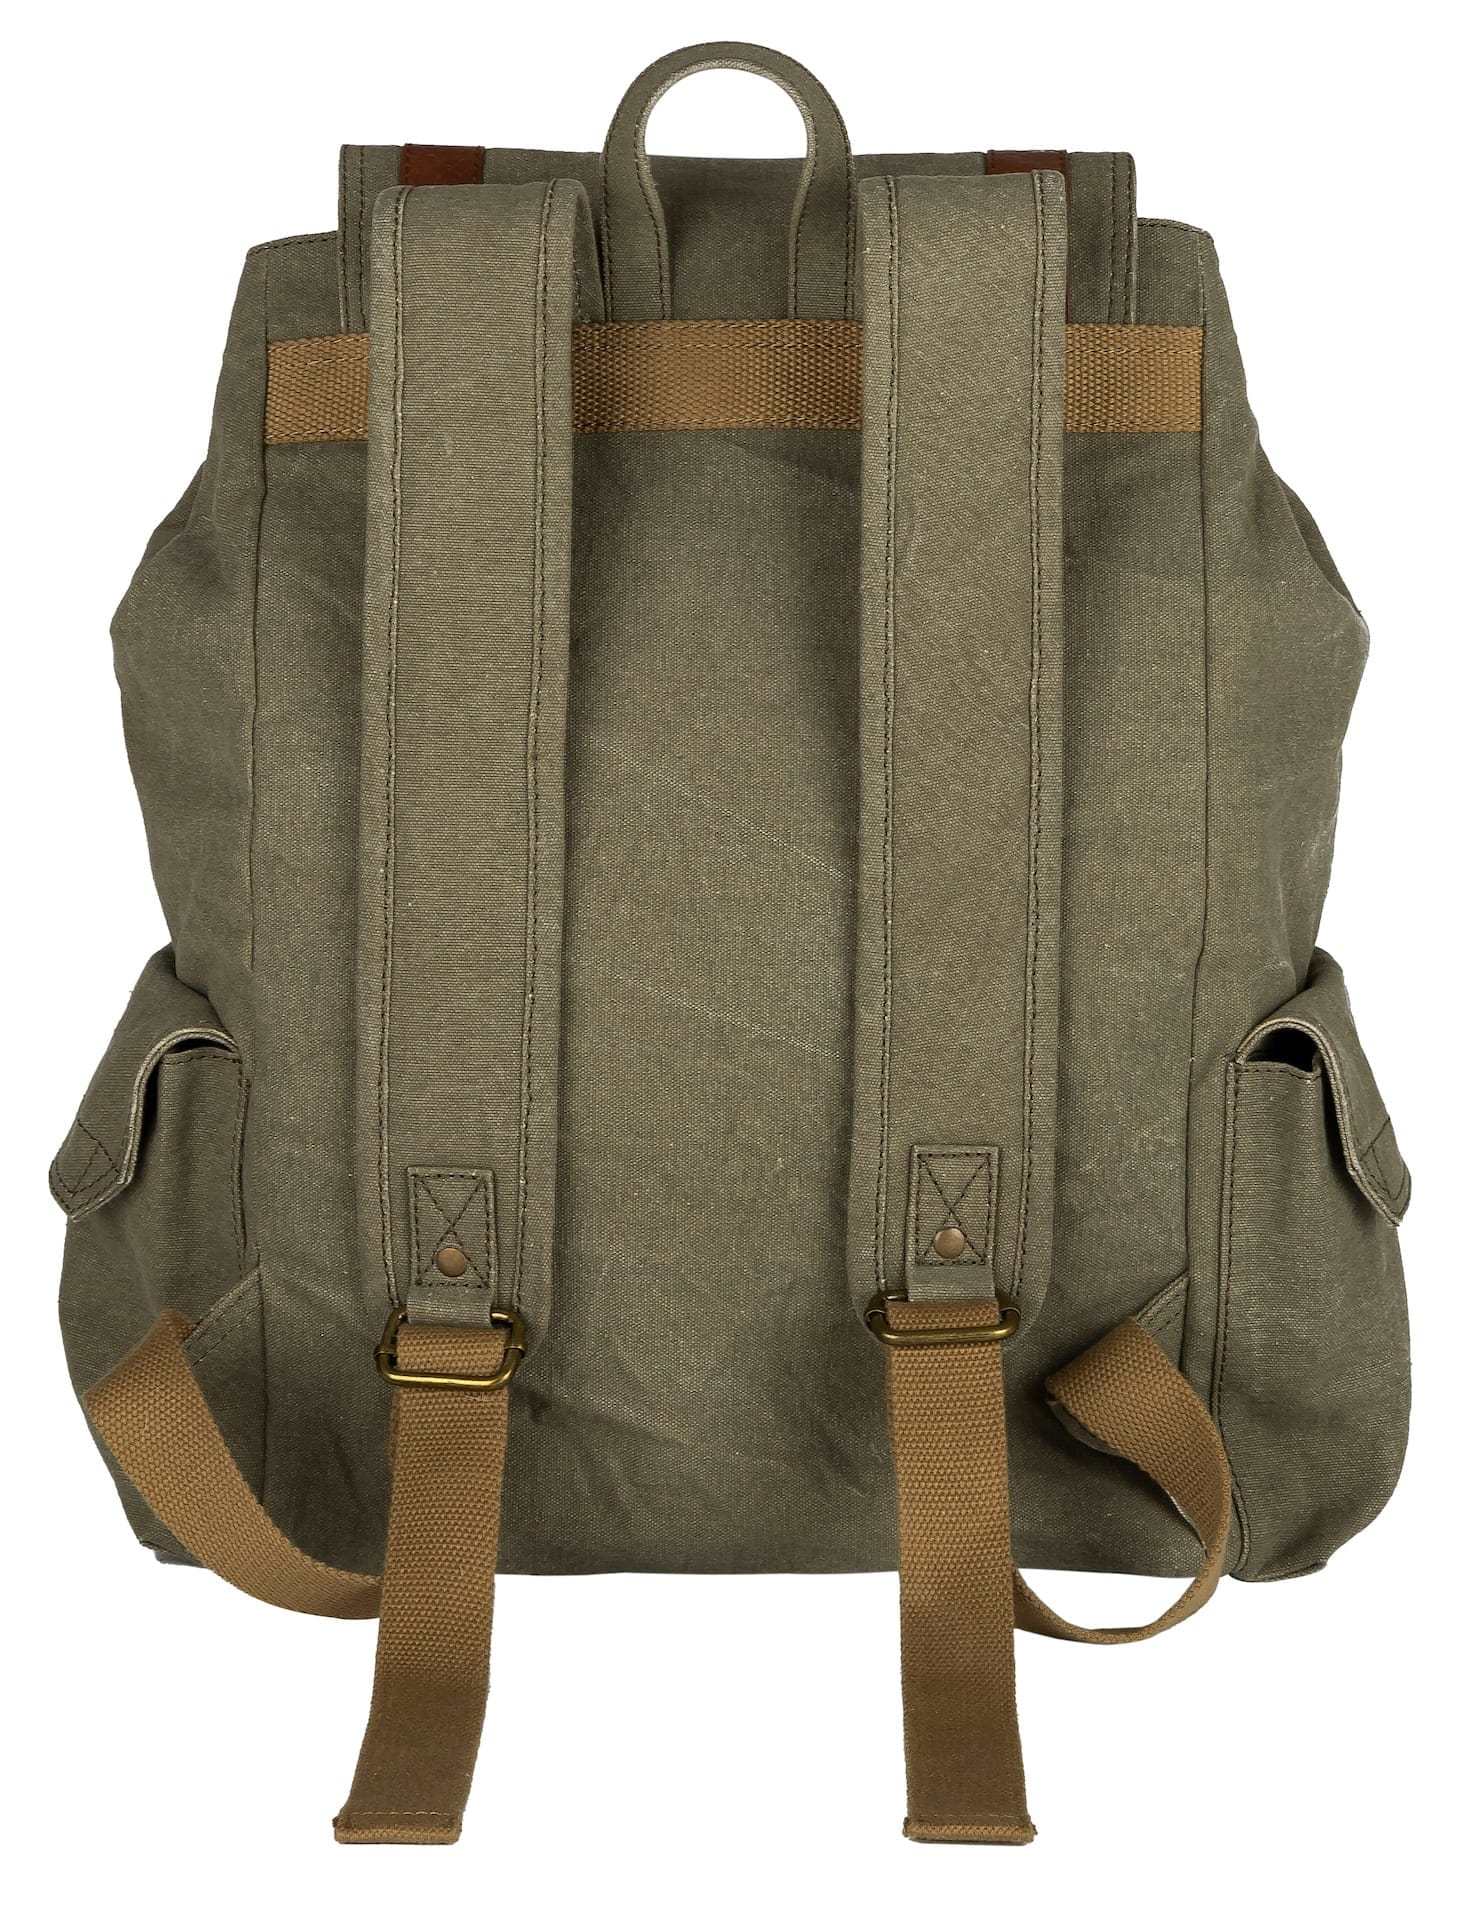 Mona-B Bag Mona B Canvas large Back Pack with inside laptop compartment for Offices, Schools and Colleges for Men and Women (Moss) - MC-1001 C